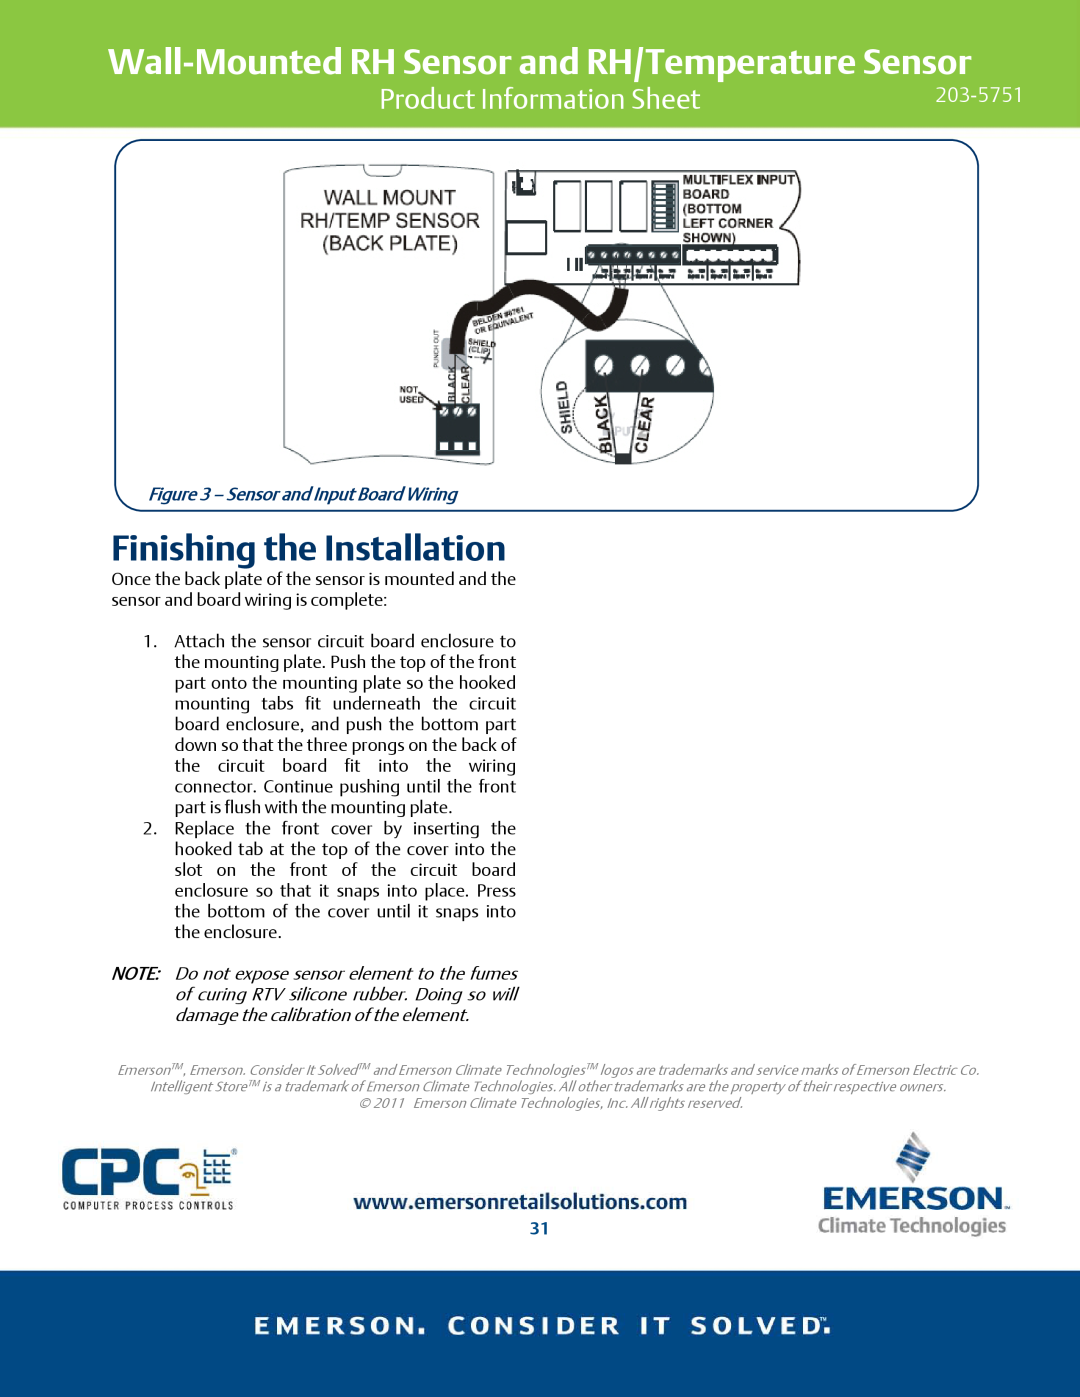 Emerson 203-5751 specifications Finishing the Installation, Sensor and Input Board Wiring, Product Information Sheet 